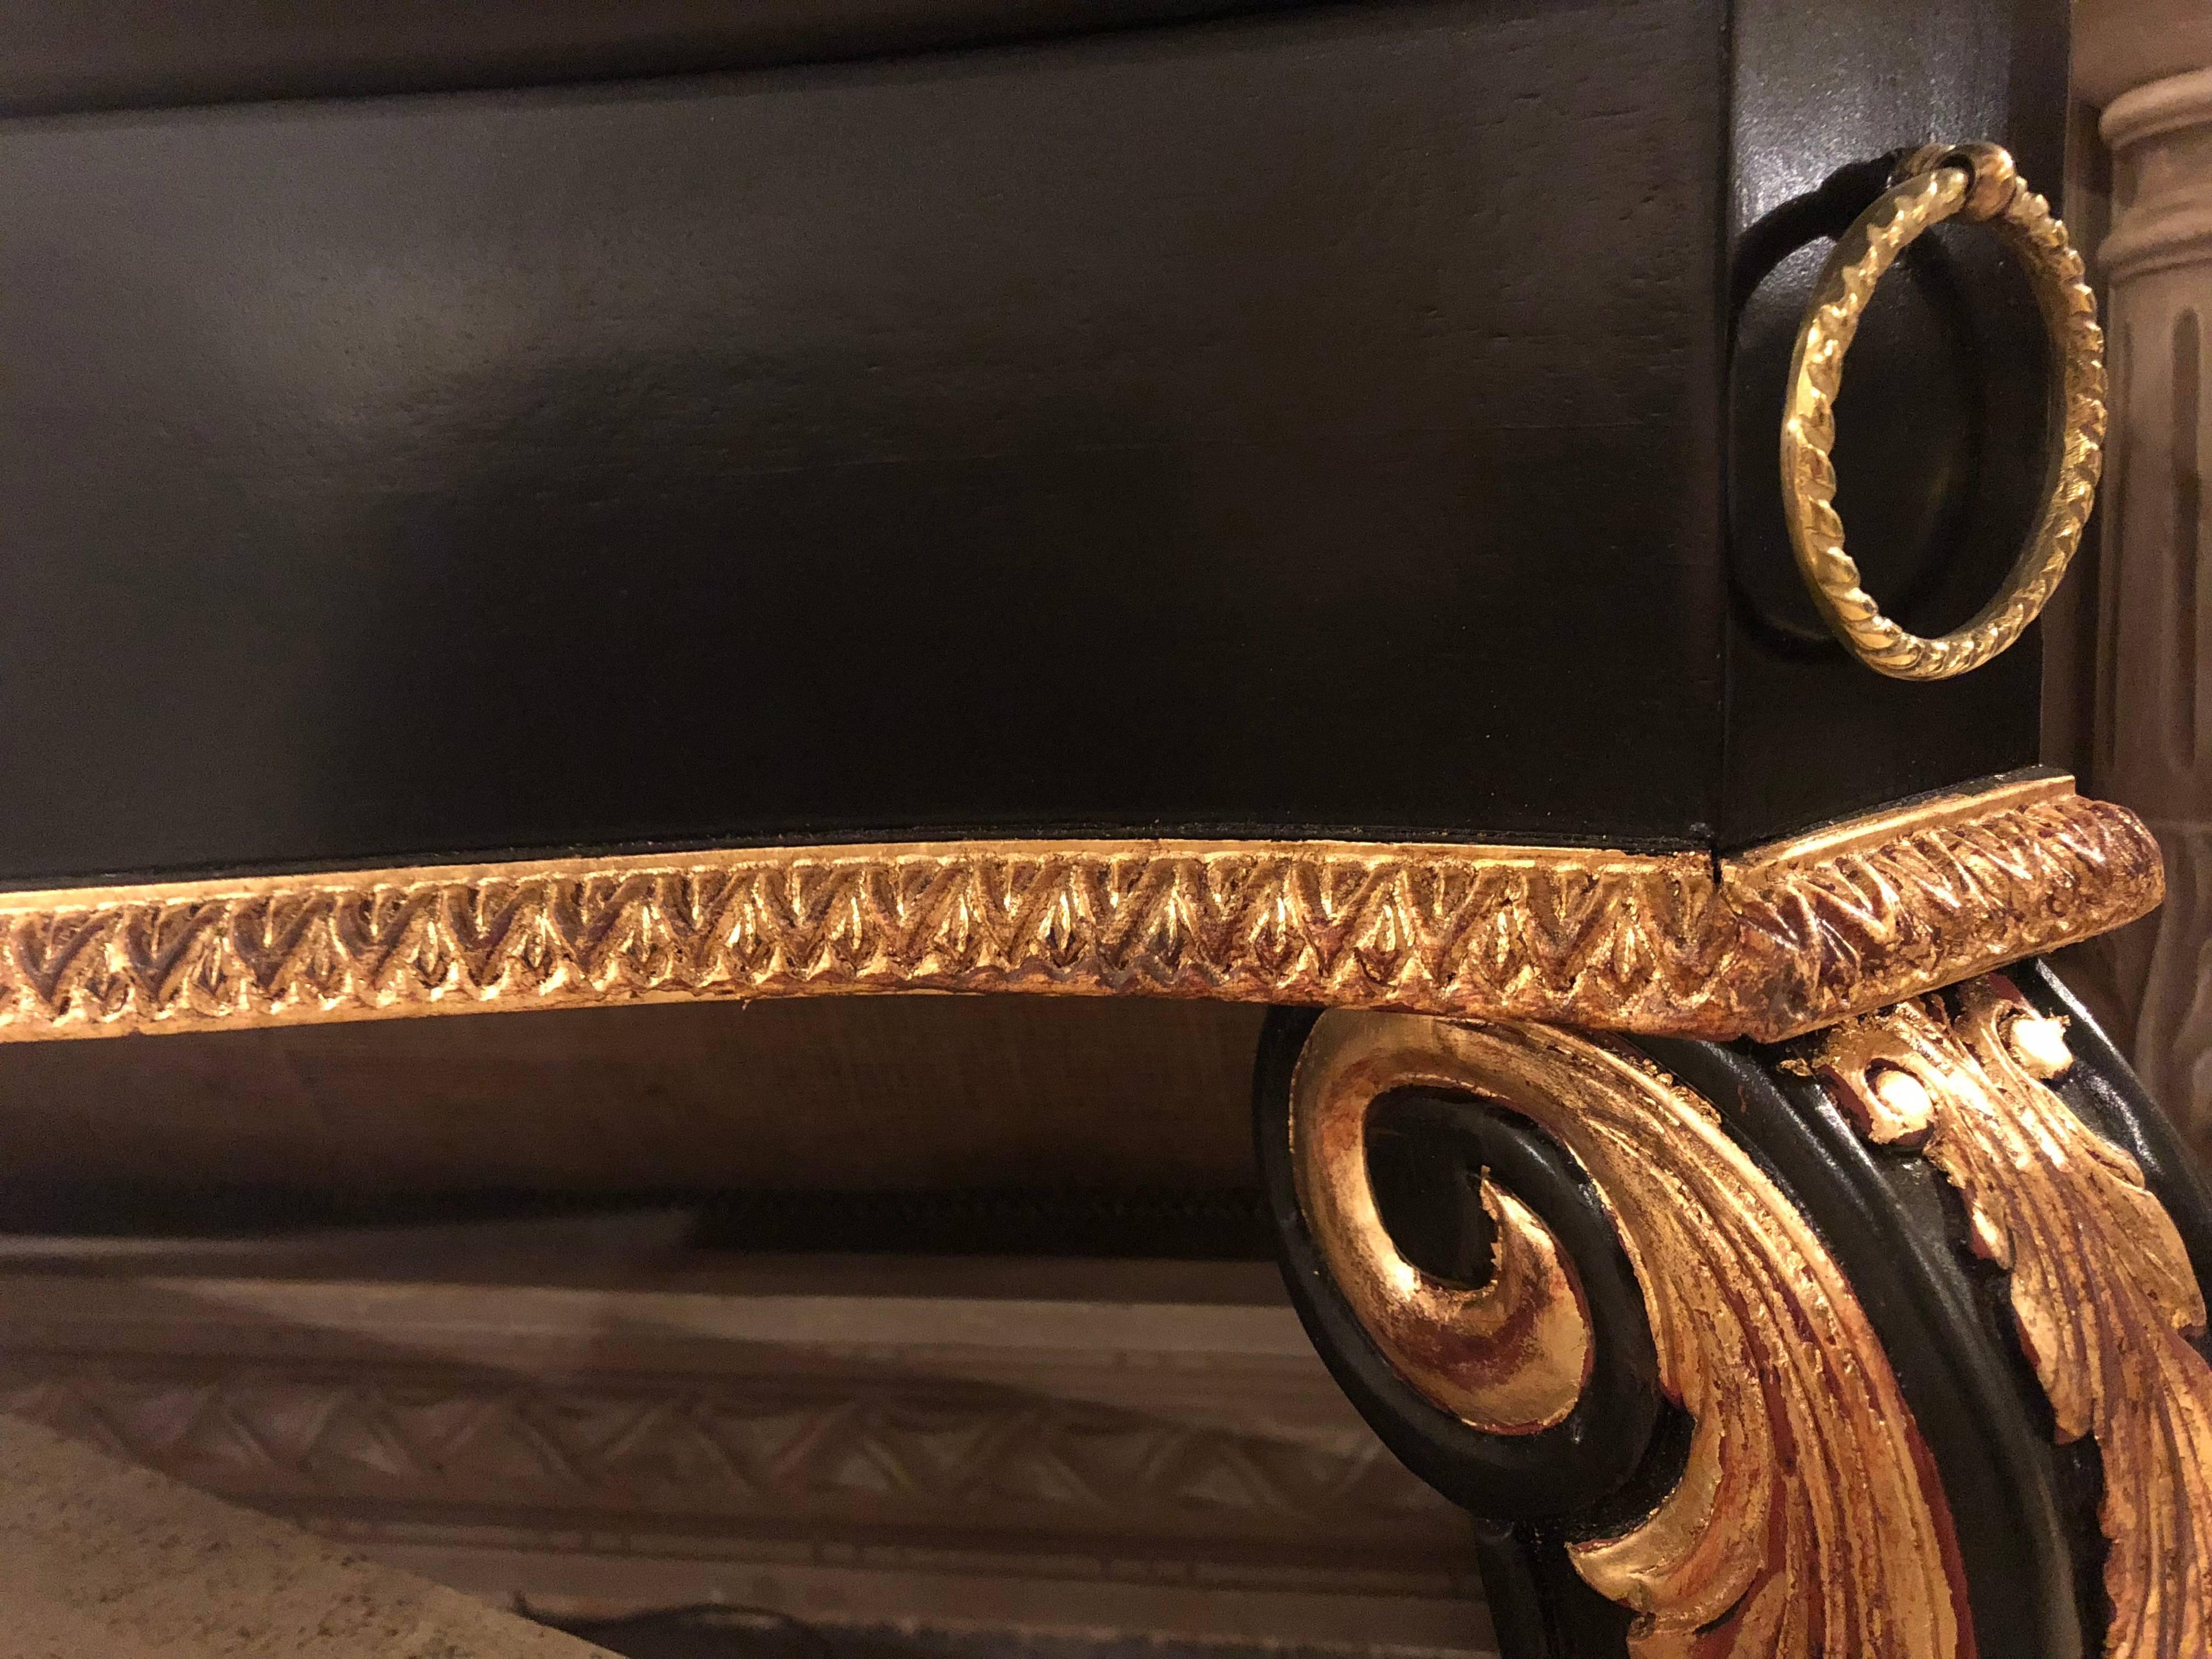 Ebony and Parcel-Gilt Decorated Console / Sofa Table with Fine Beveled Glass Top For Sale 2